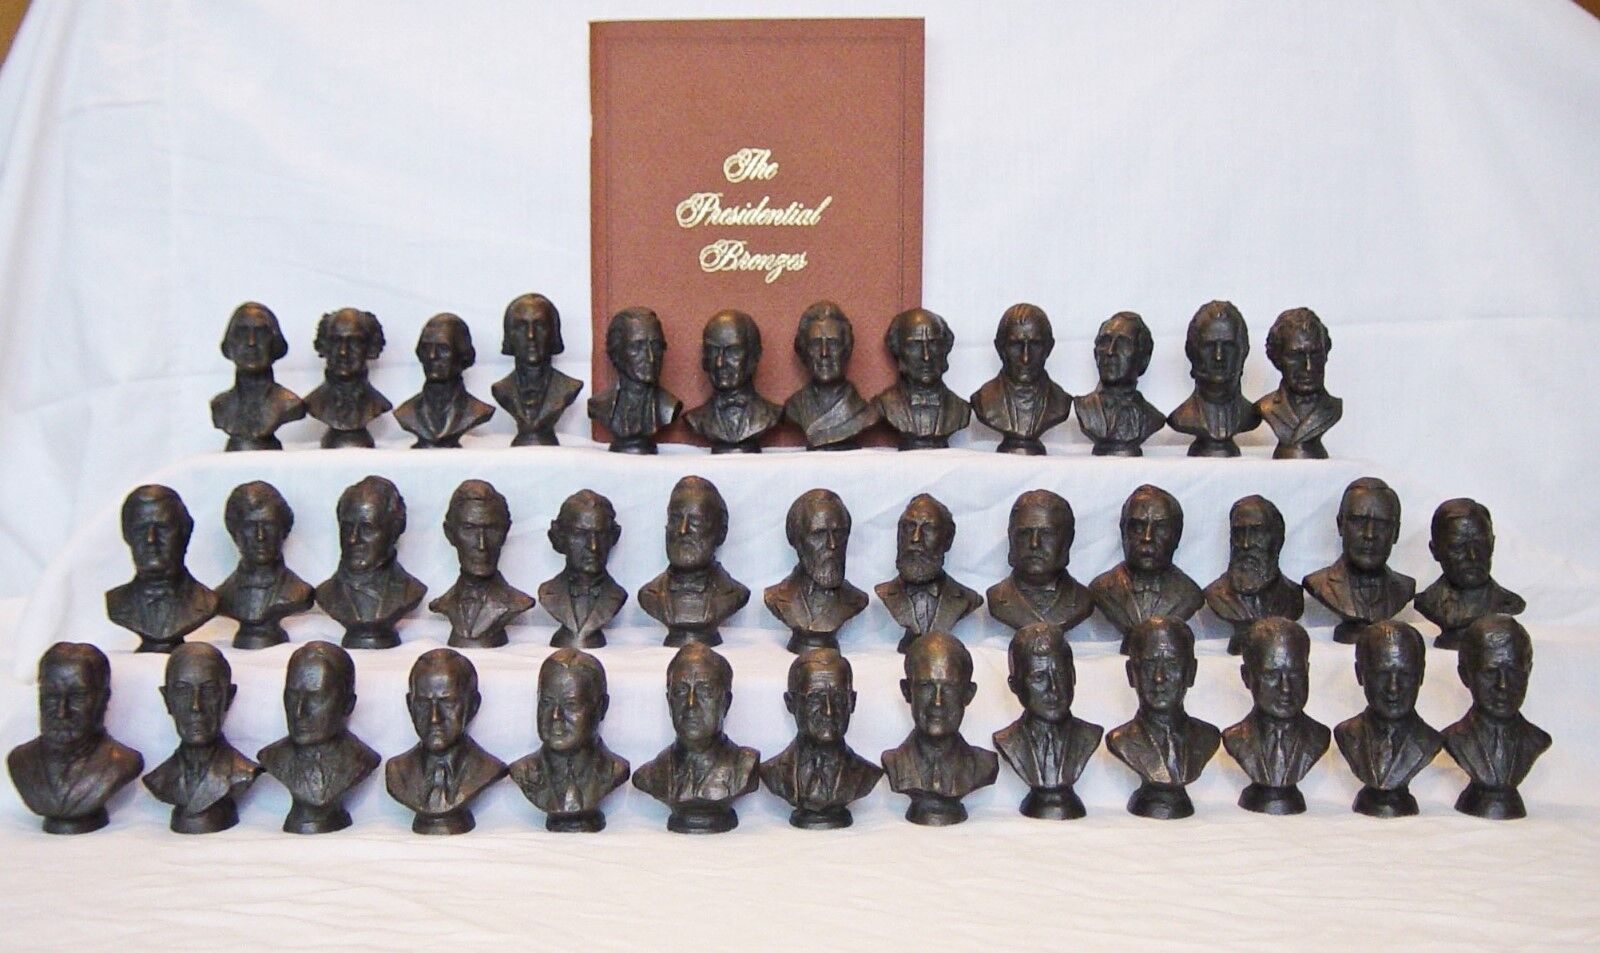 “PRESIDENTIAL BRONZES” 1977 Franklin Mint Complete set of 38 Solid Bronze Busts